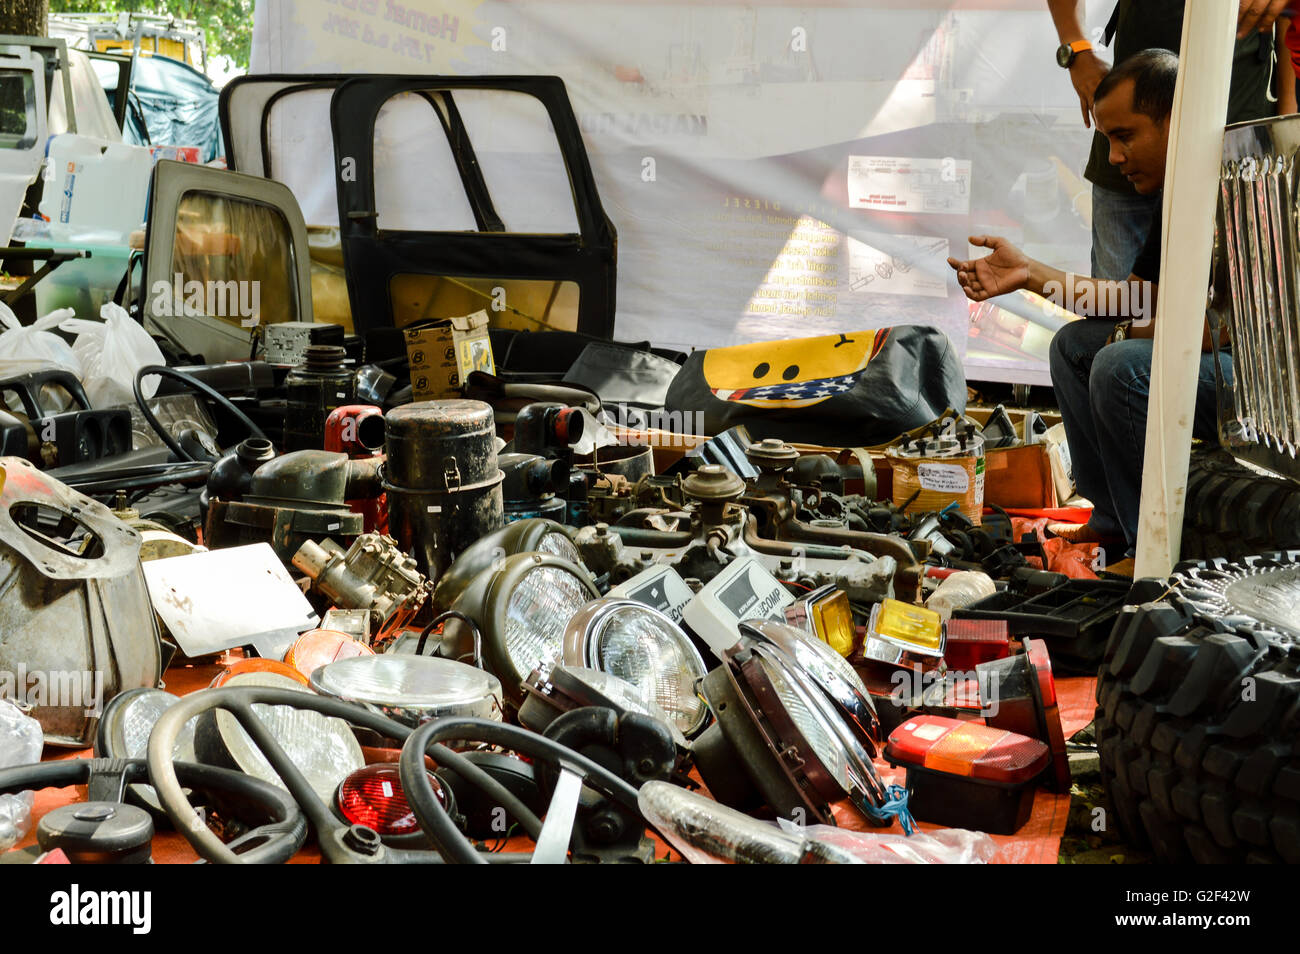 Former automotive components for sale in automotive event tumplek blek 2016, Jakarta, Indonesia Stock Photo